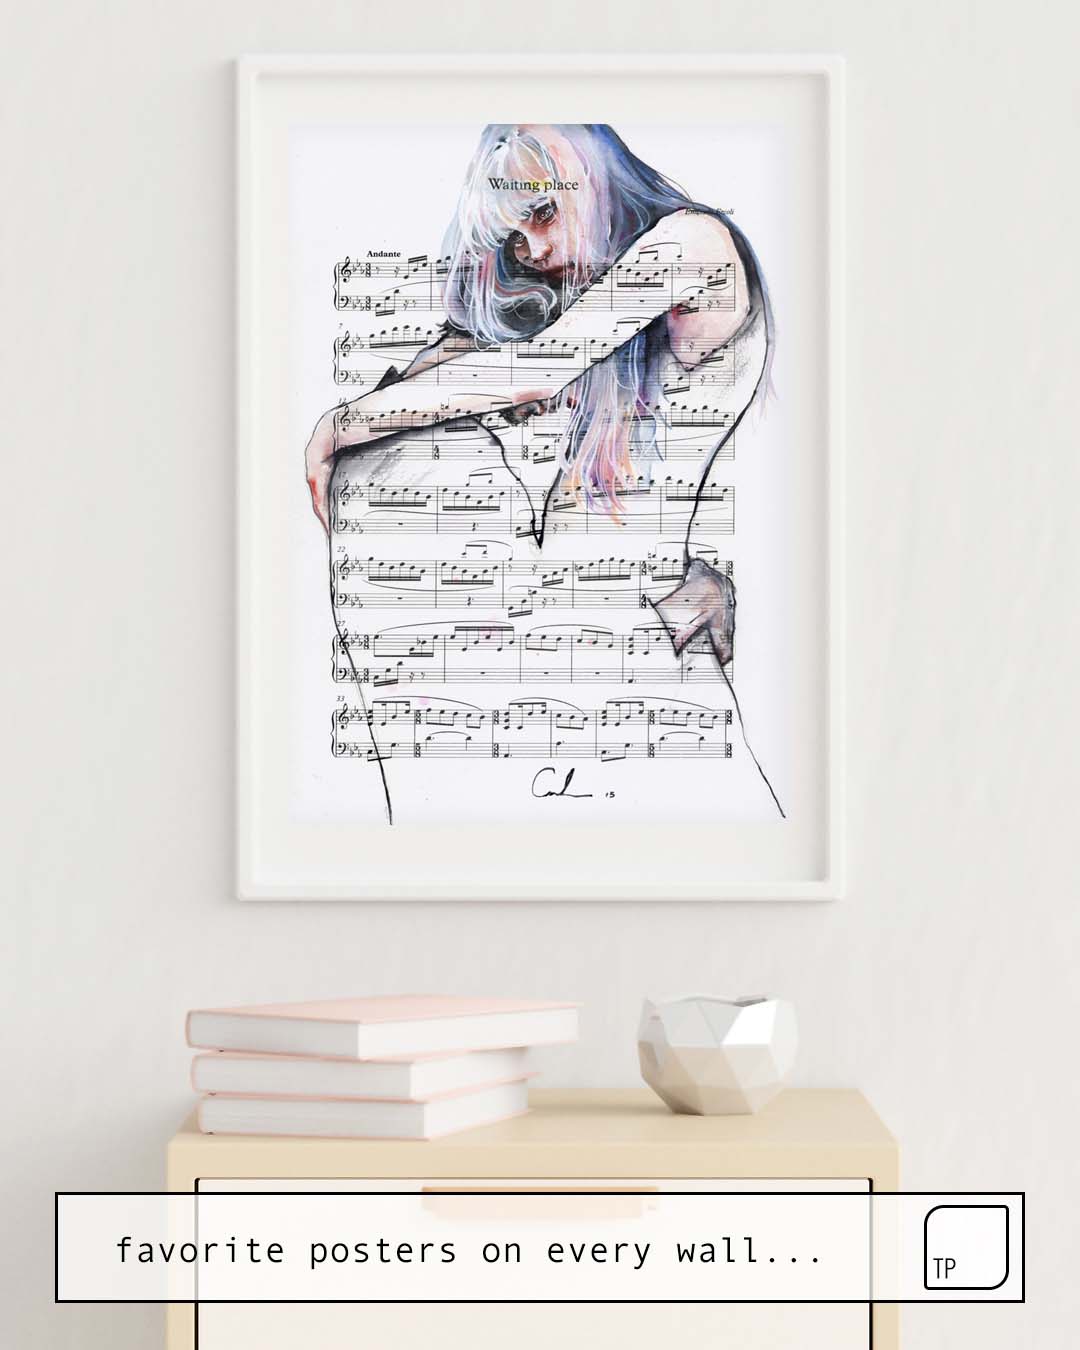 The photo shows an example of furnishing with the motif WAITING PLACE ON SHEET MUSIC by Agnes Cecile as mural